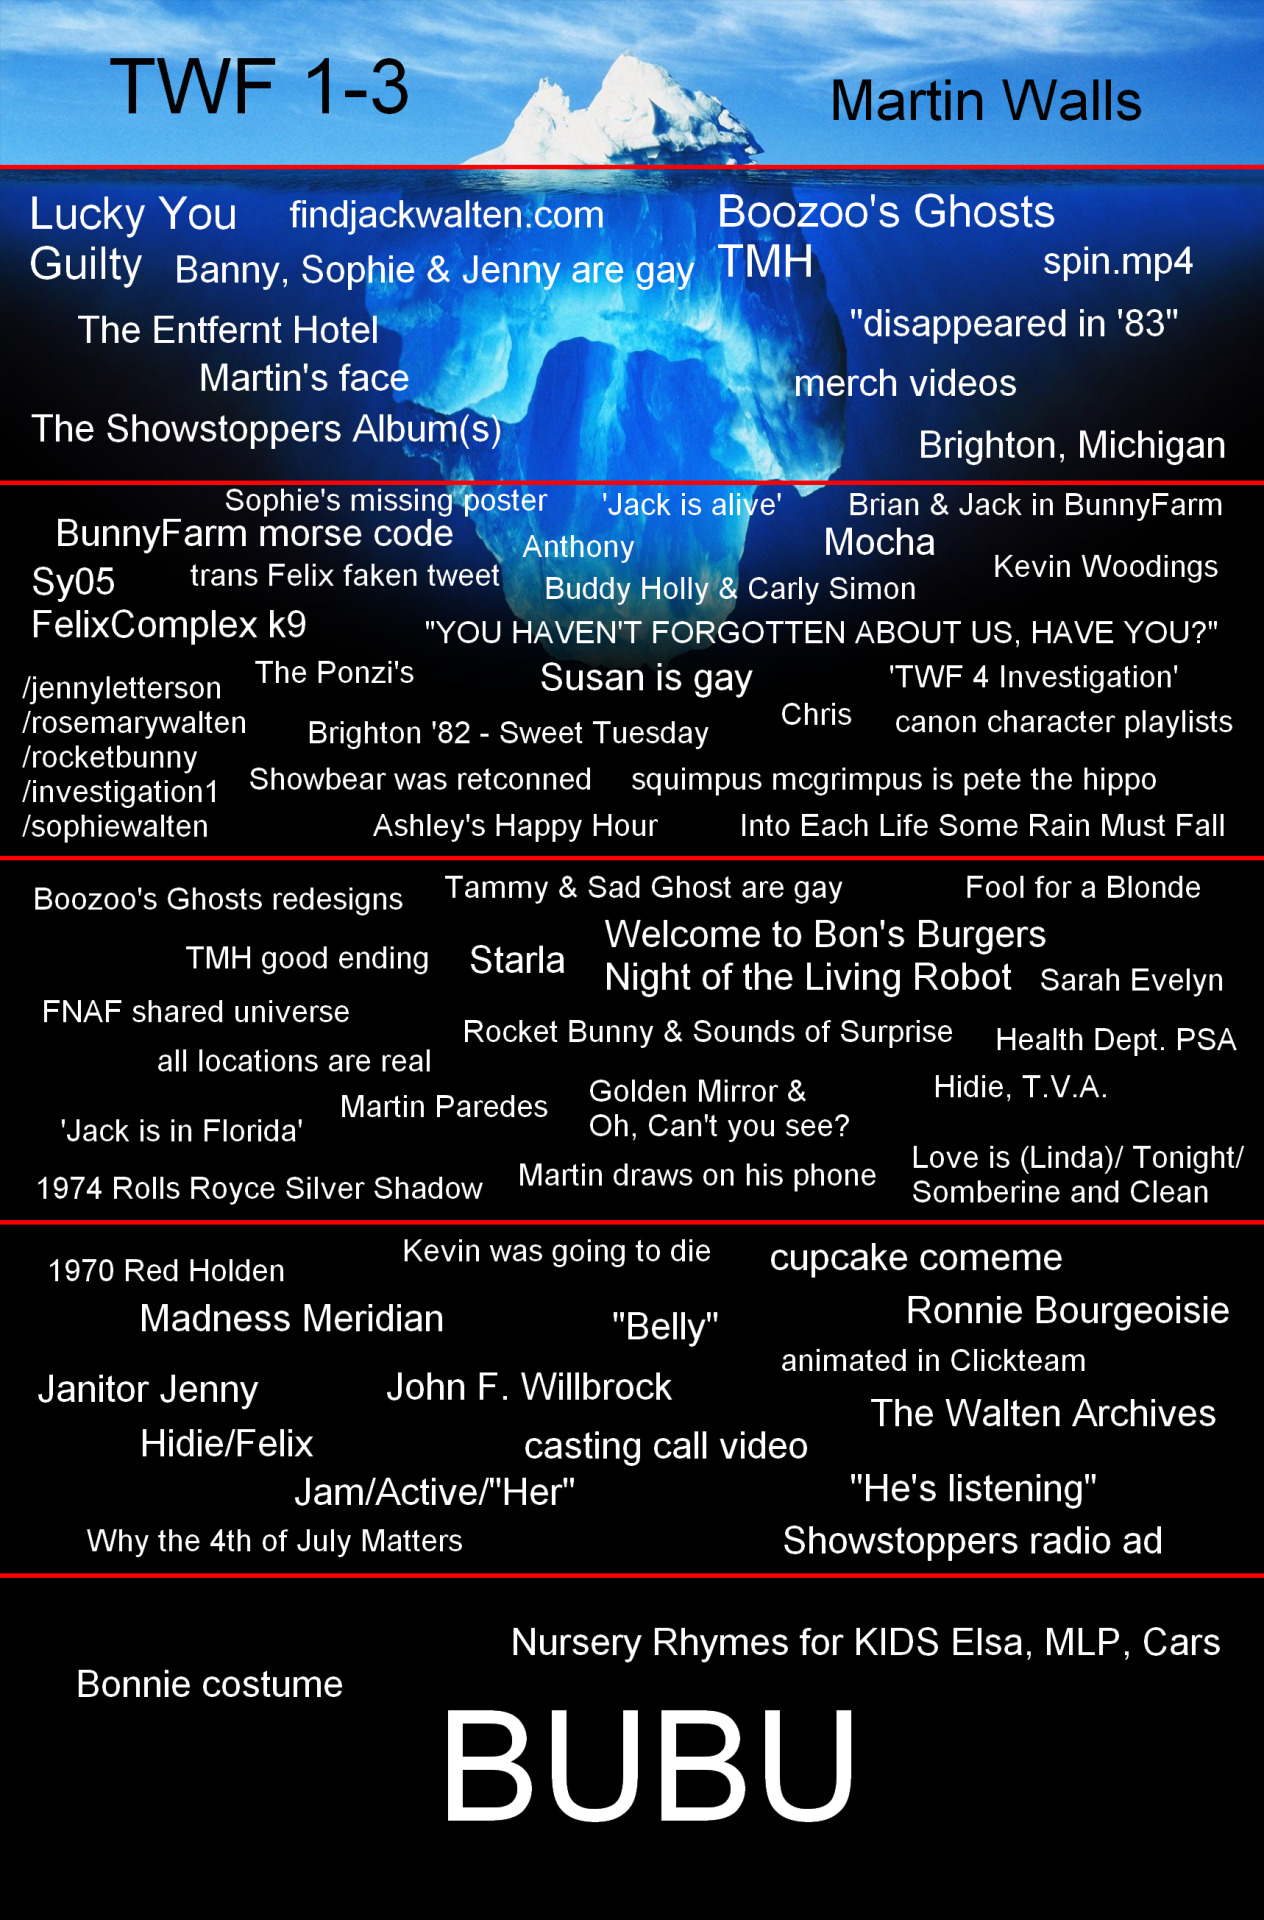 The walten files (Season 1 only) V2 Iceberg : I remove all pointless entry  like just character name and add all the suggestion and theory that were  explain to me. : r/WaltenFiles